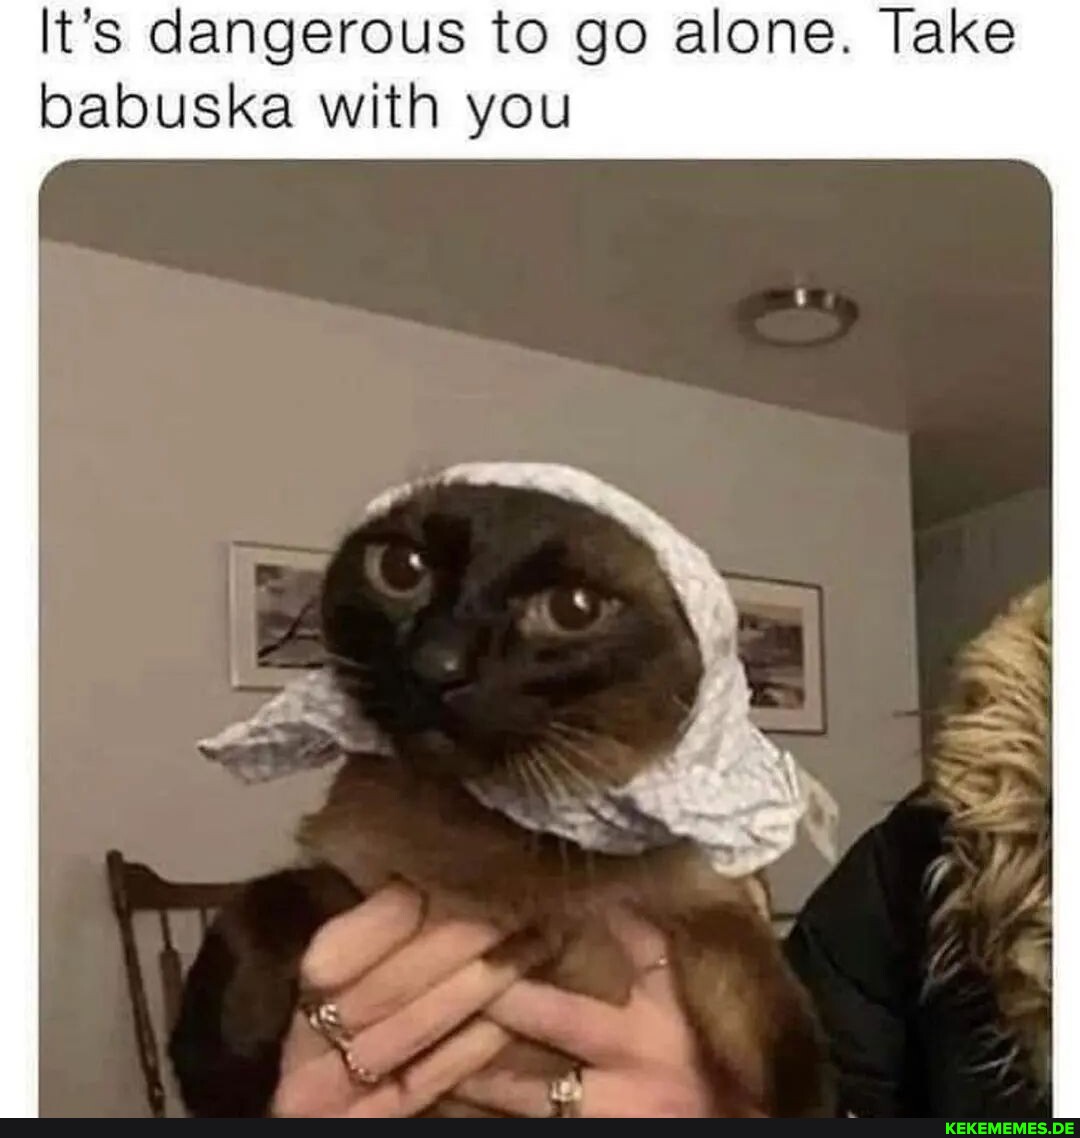 It's dangerous to go alone. Take babuska with you